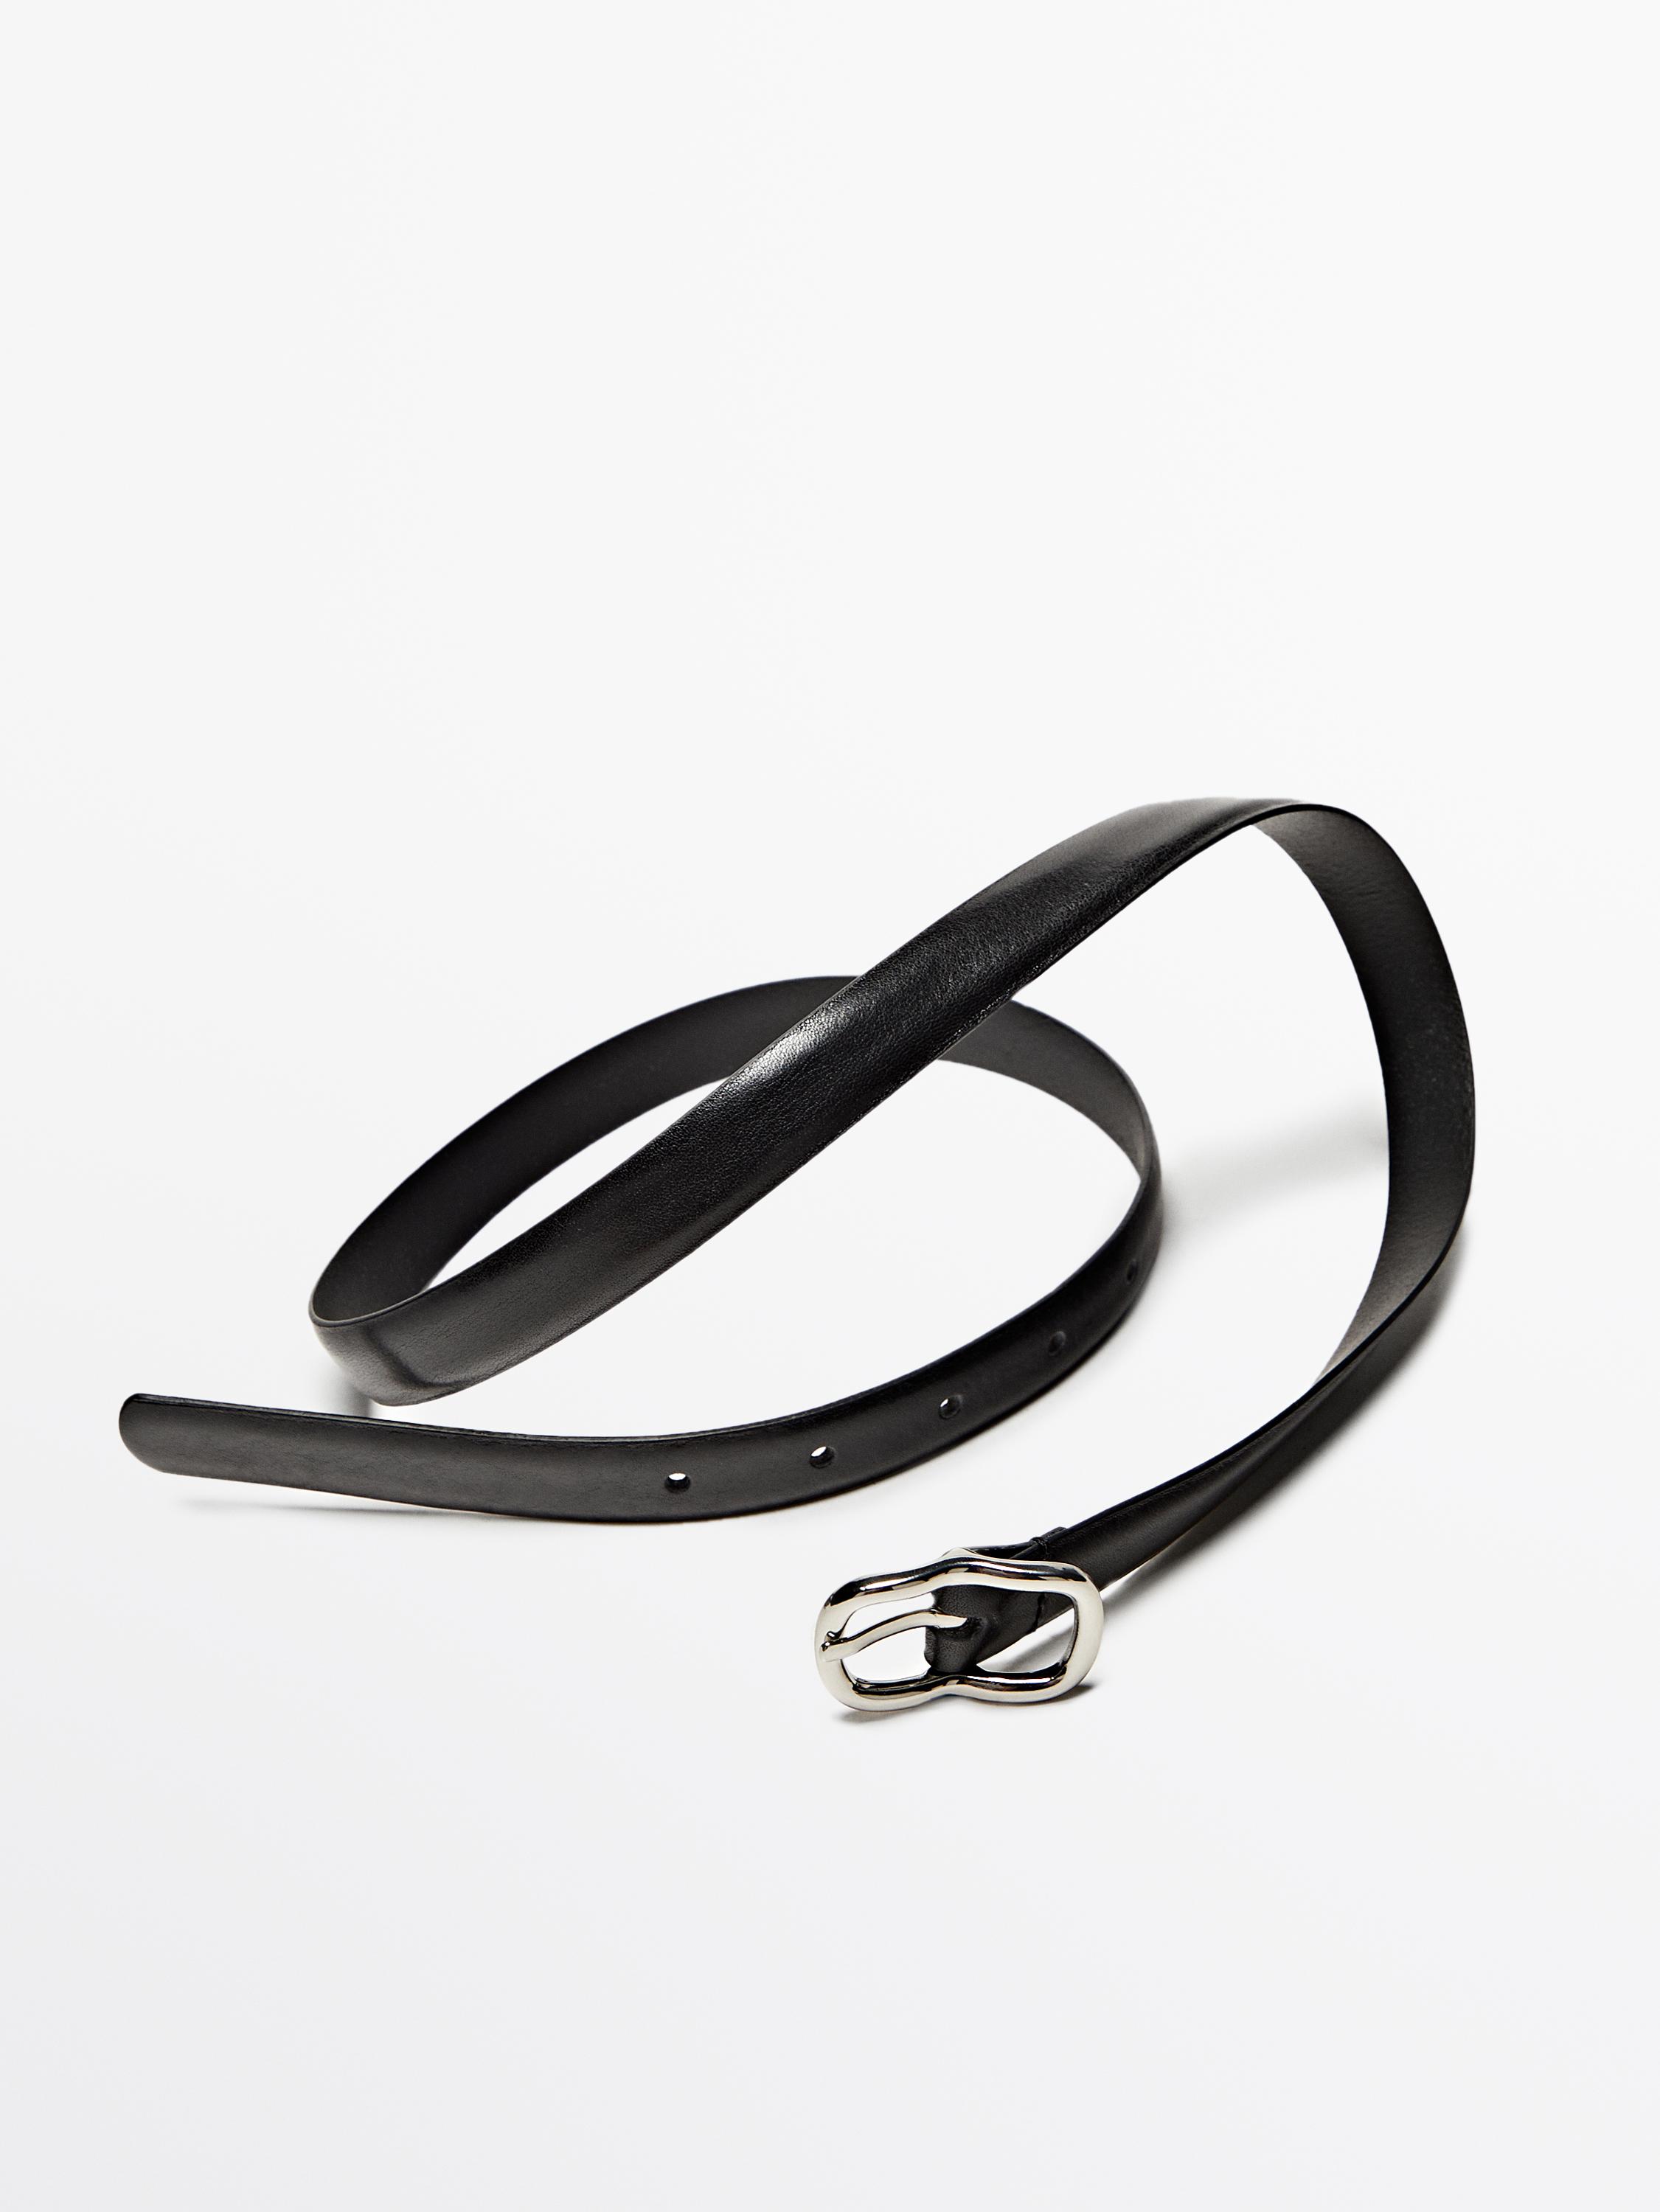 Leather belt with an oval buckle - Black | ZARA United States